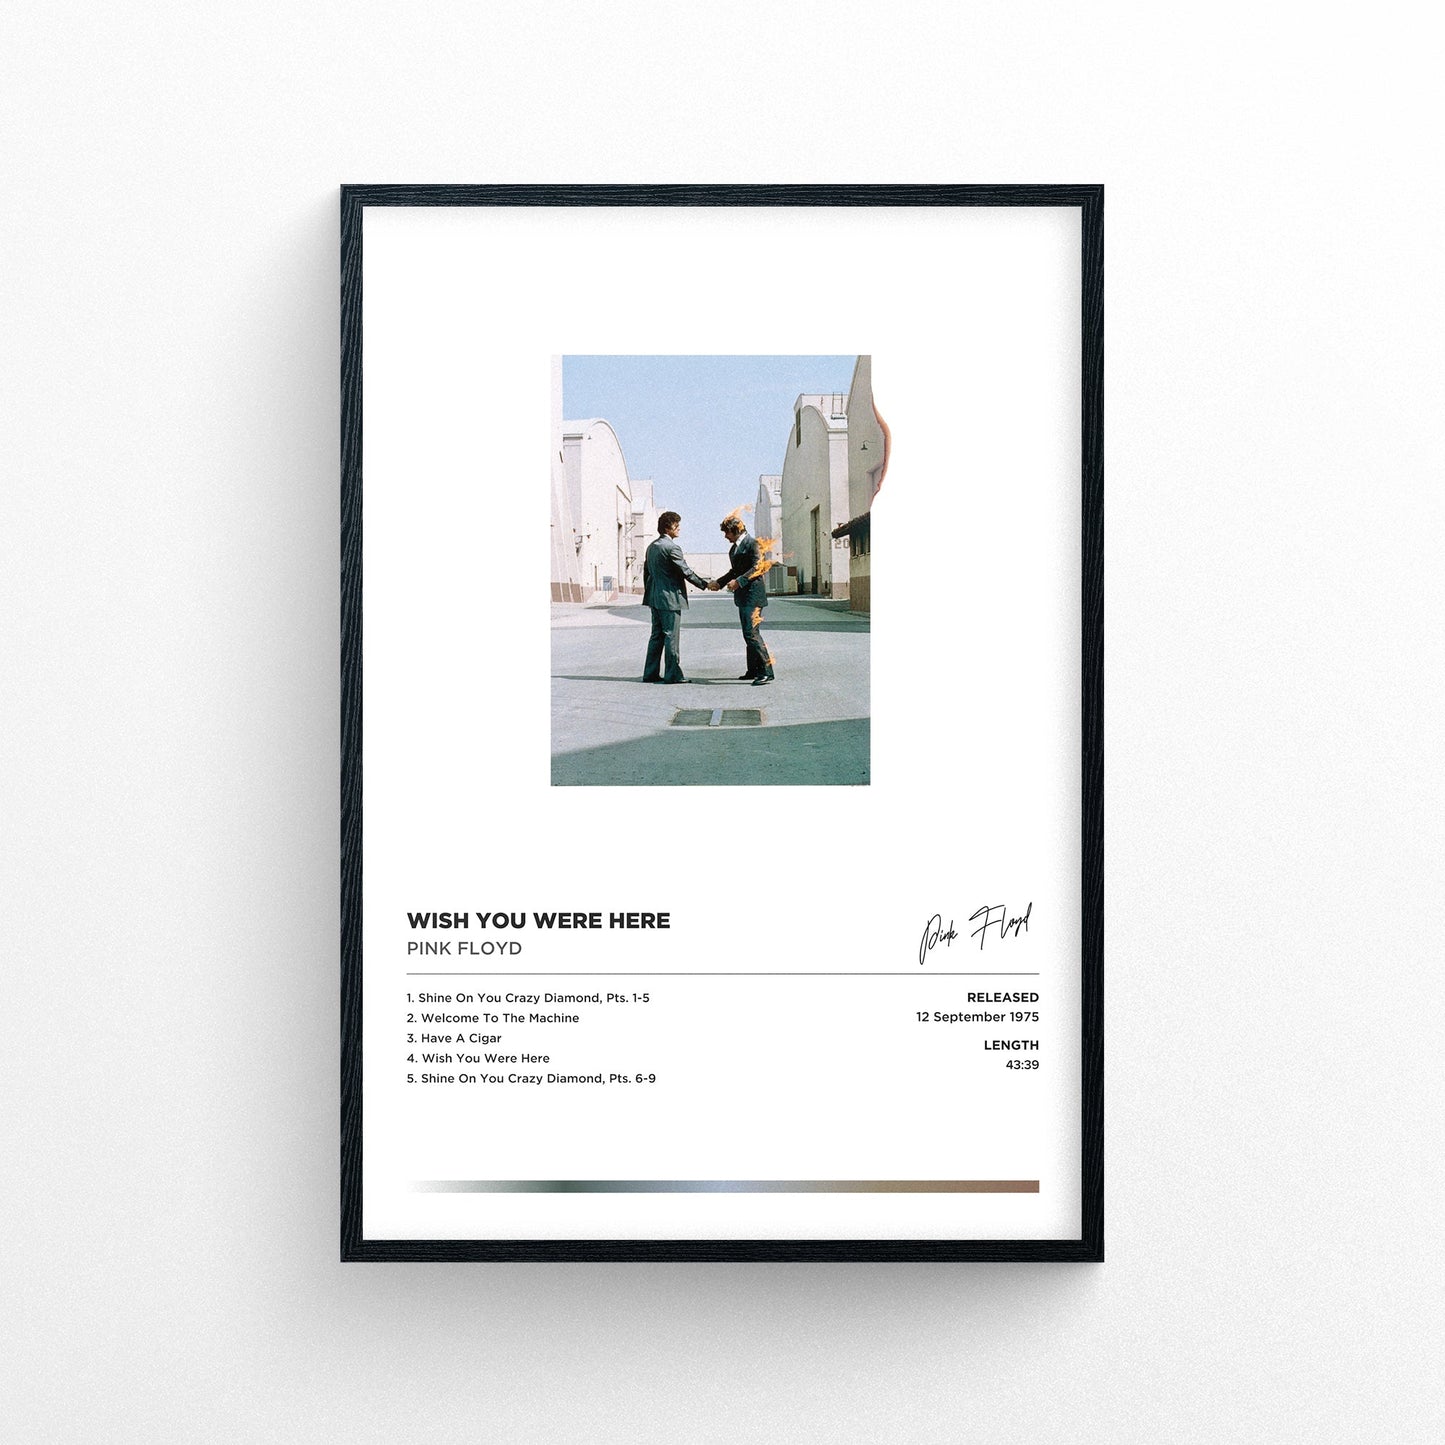 Pink Floyd - Wish You Were Here Framed Poster Print | Polaroid Style | Album Cover Artwork